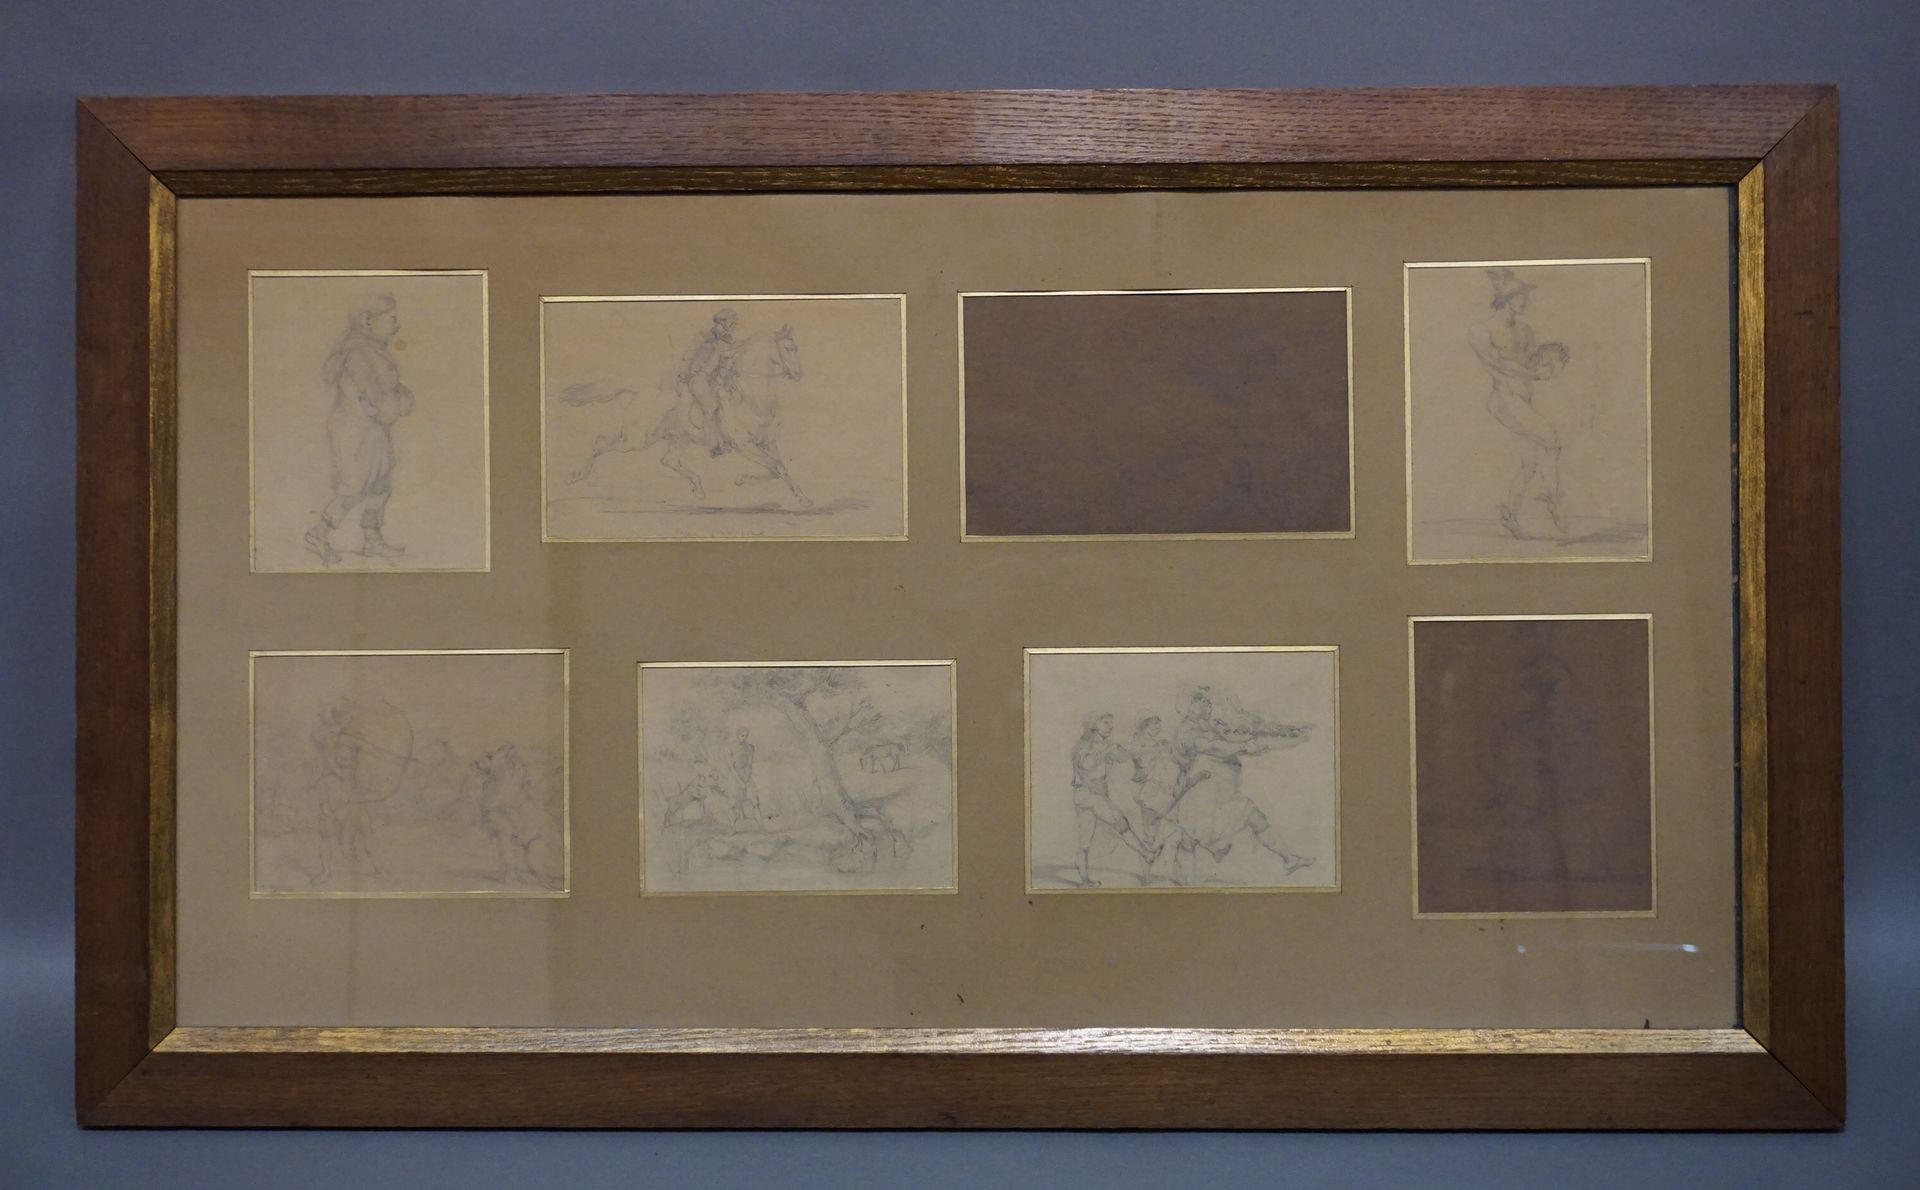 H. REGNAULT Frame containing 8 drawings: "Rider", "Hunting scene", "Country scen&hellip;